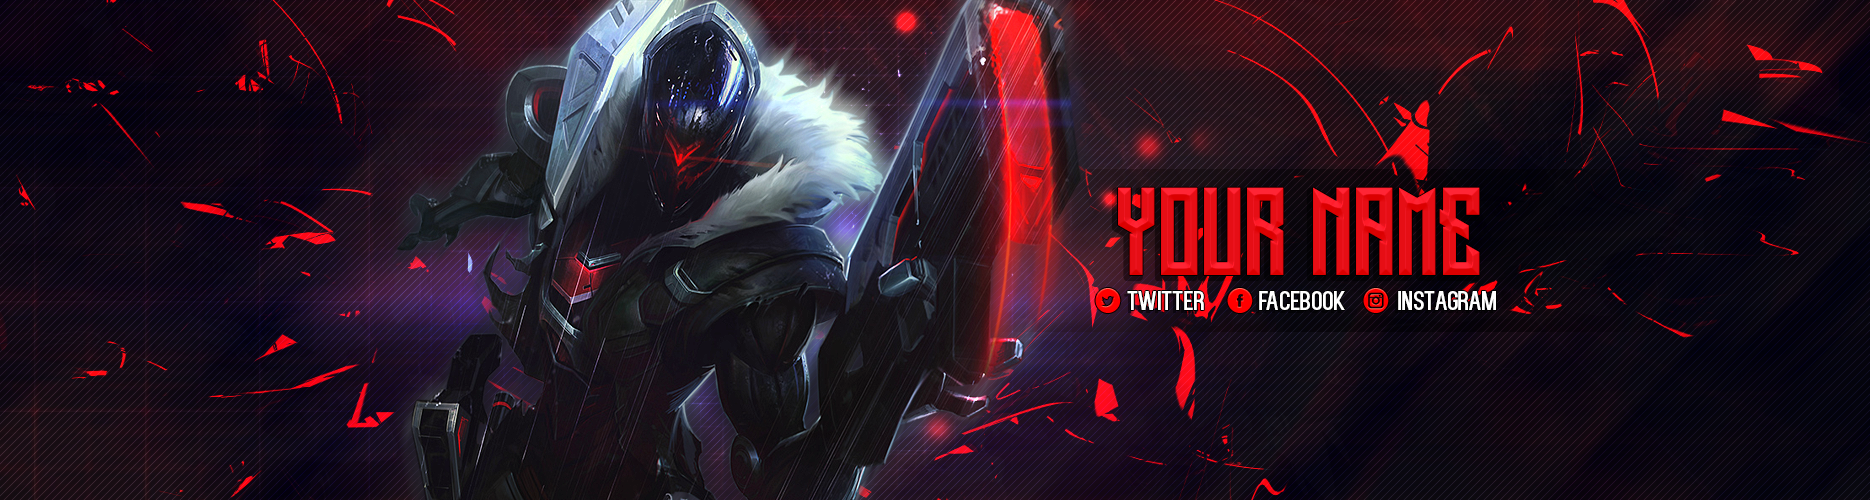 Lol Project Jhin Twitch Banner By Psychomilla On Deviantart